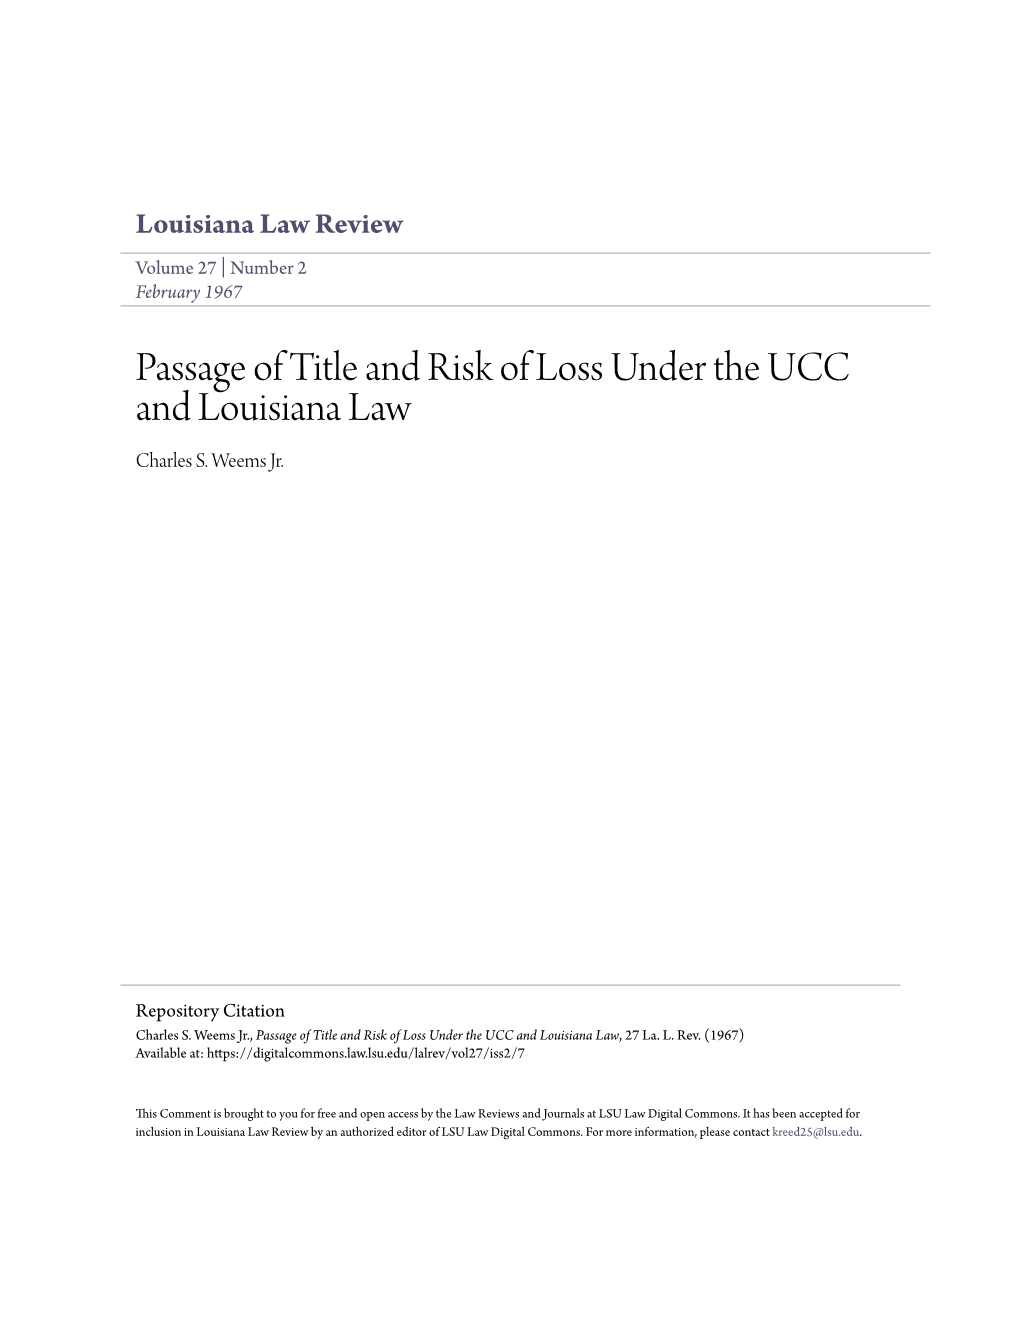 Passage of Title and Risk of Loss Under the UCC and Louisiana Law Charles S